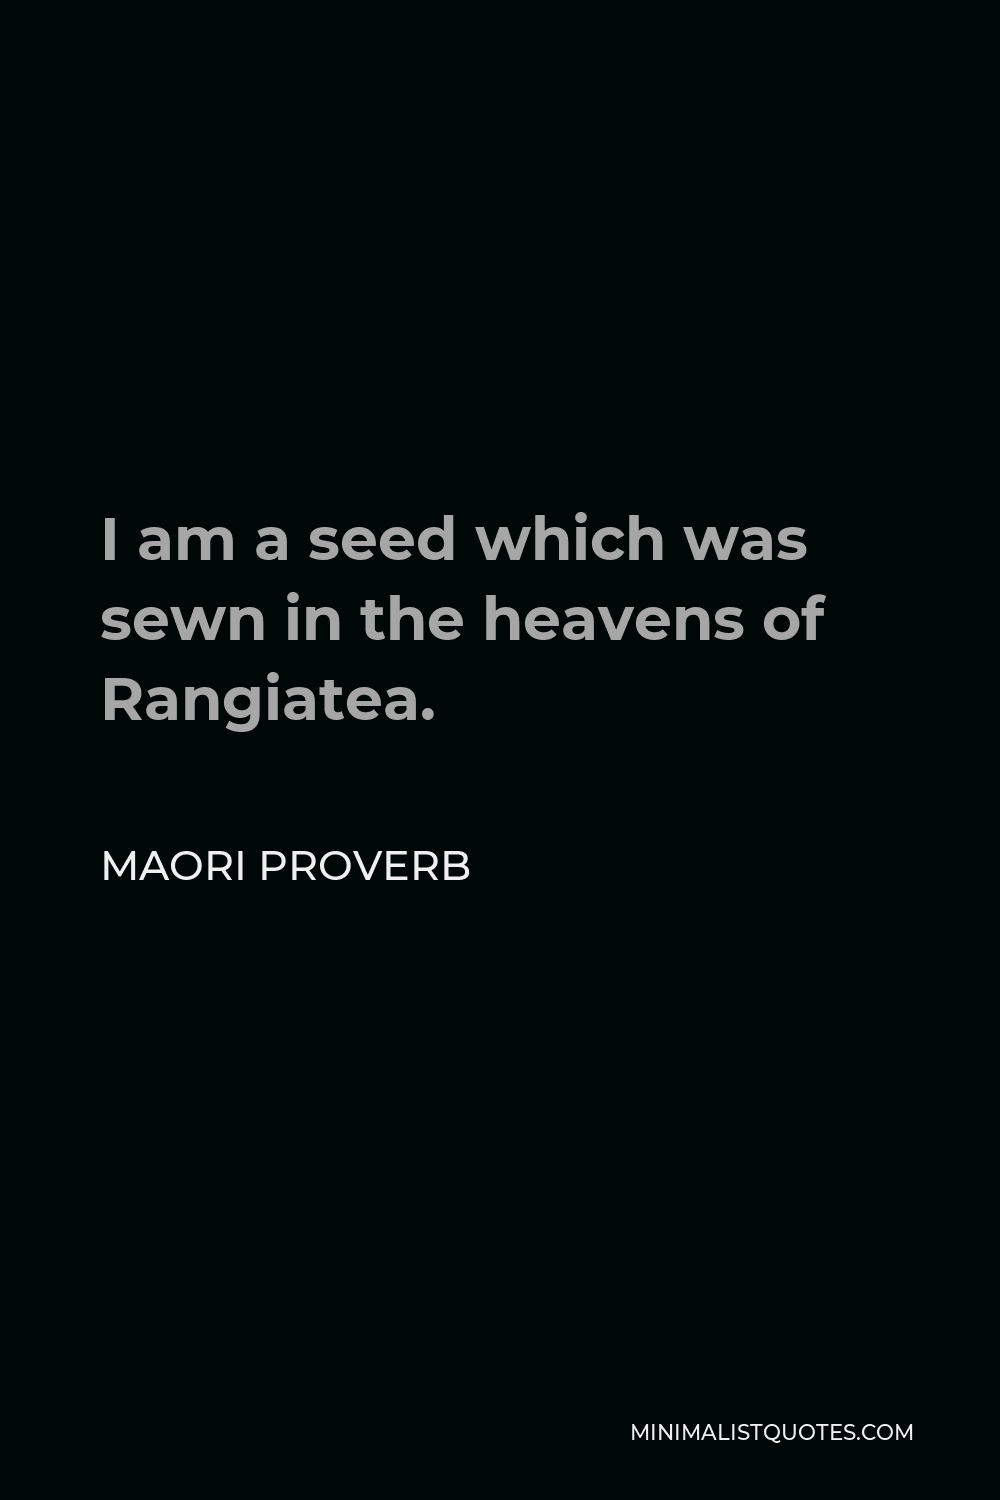 Maori Proverb Quote - I am a seed which was sewn in the heavens of Rangiatea.